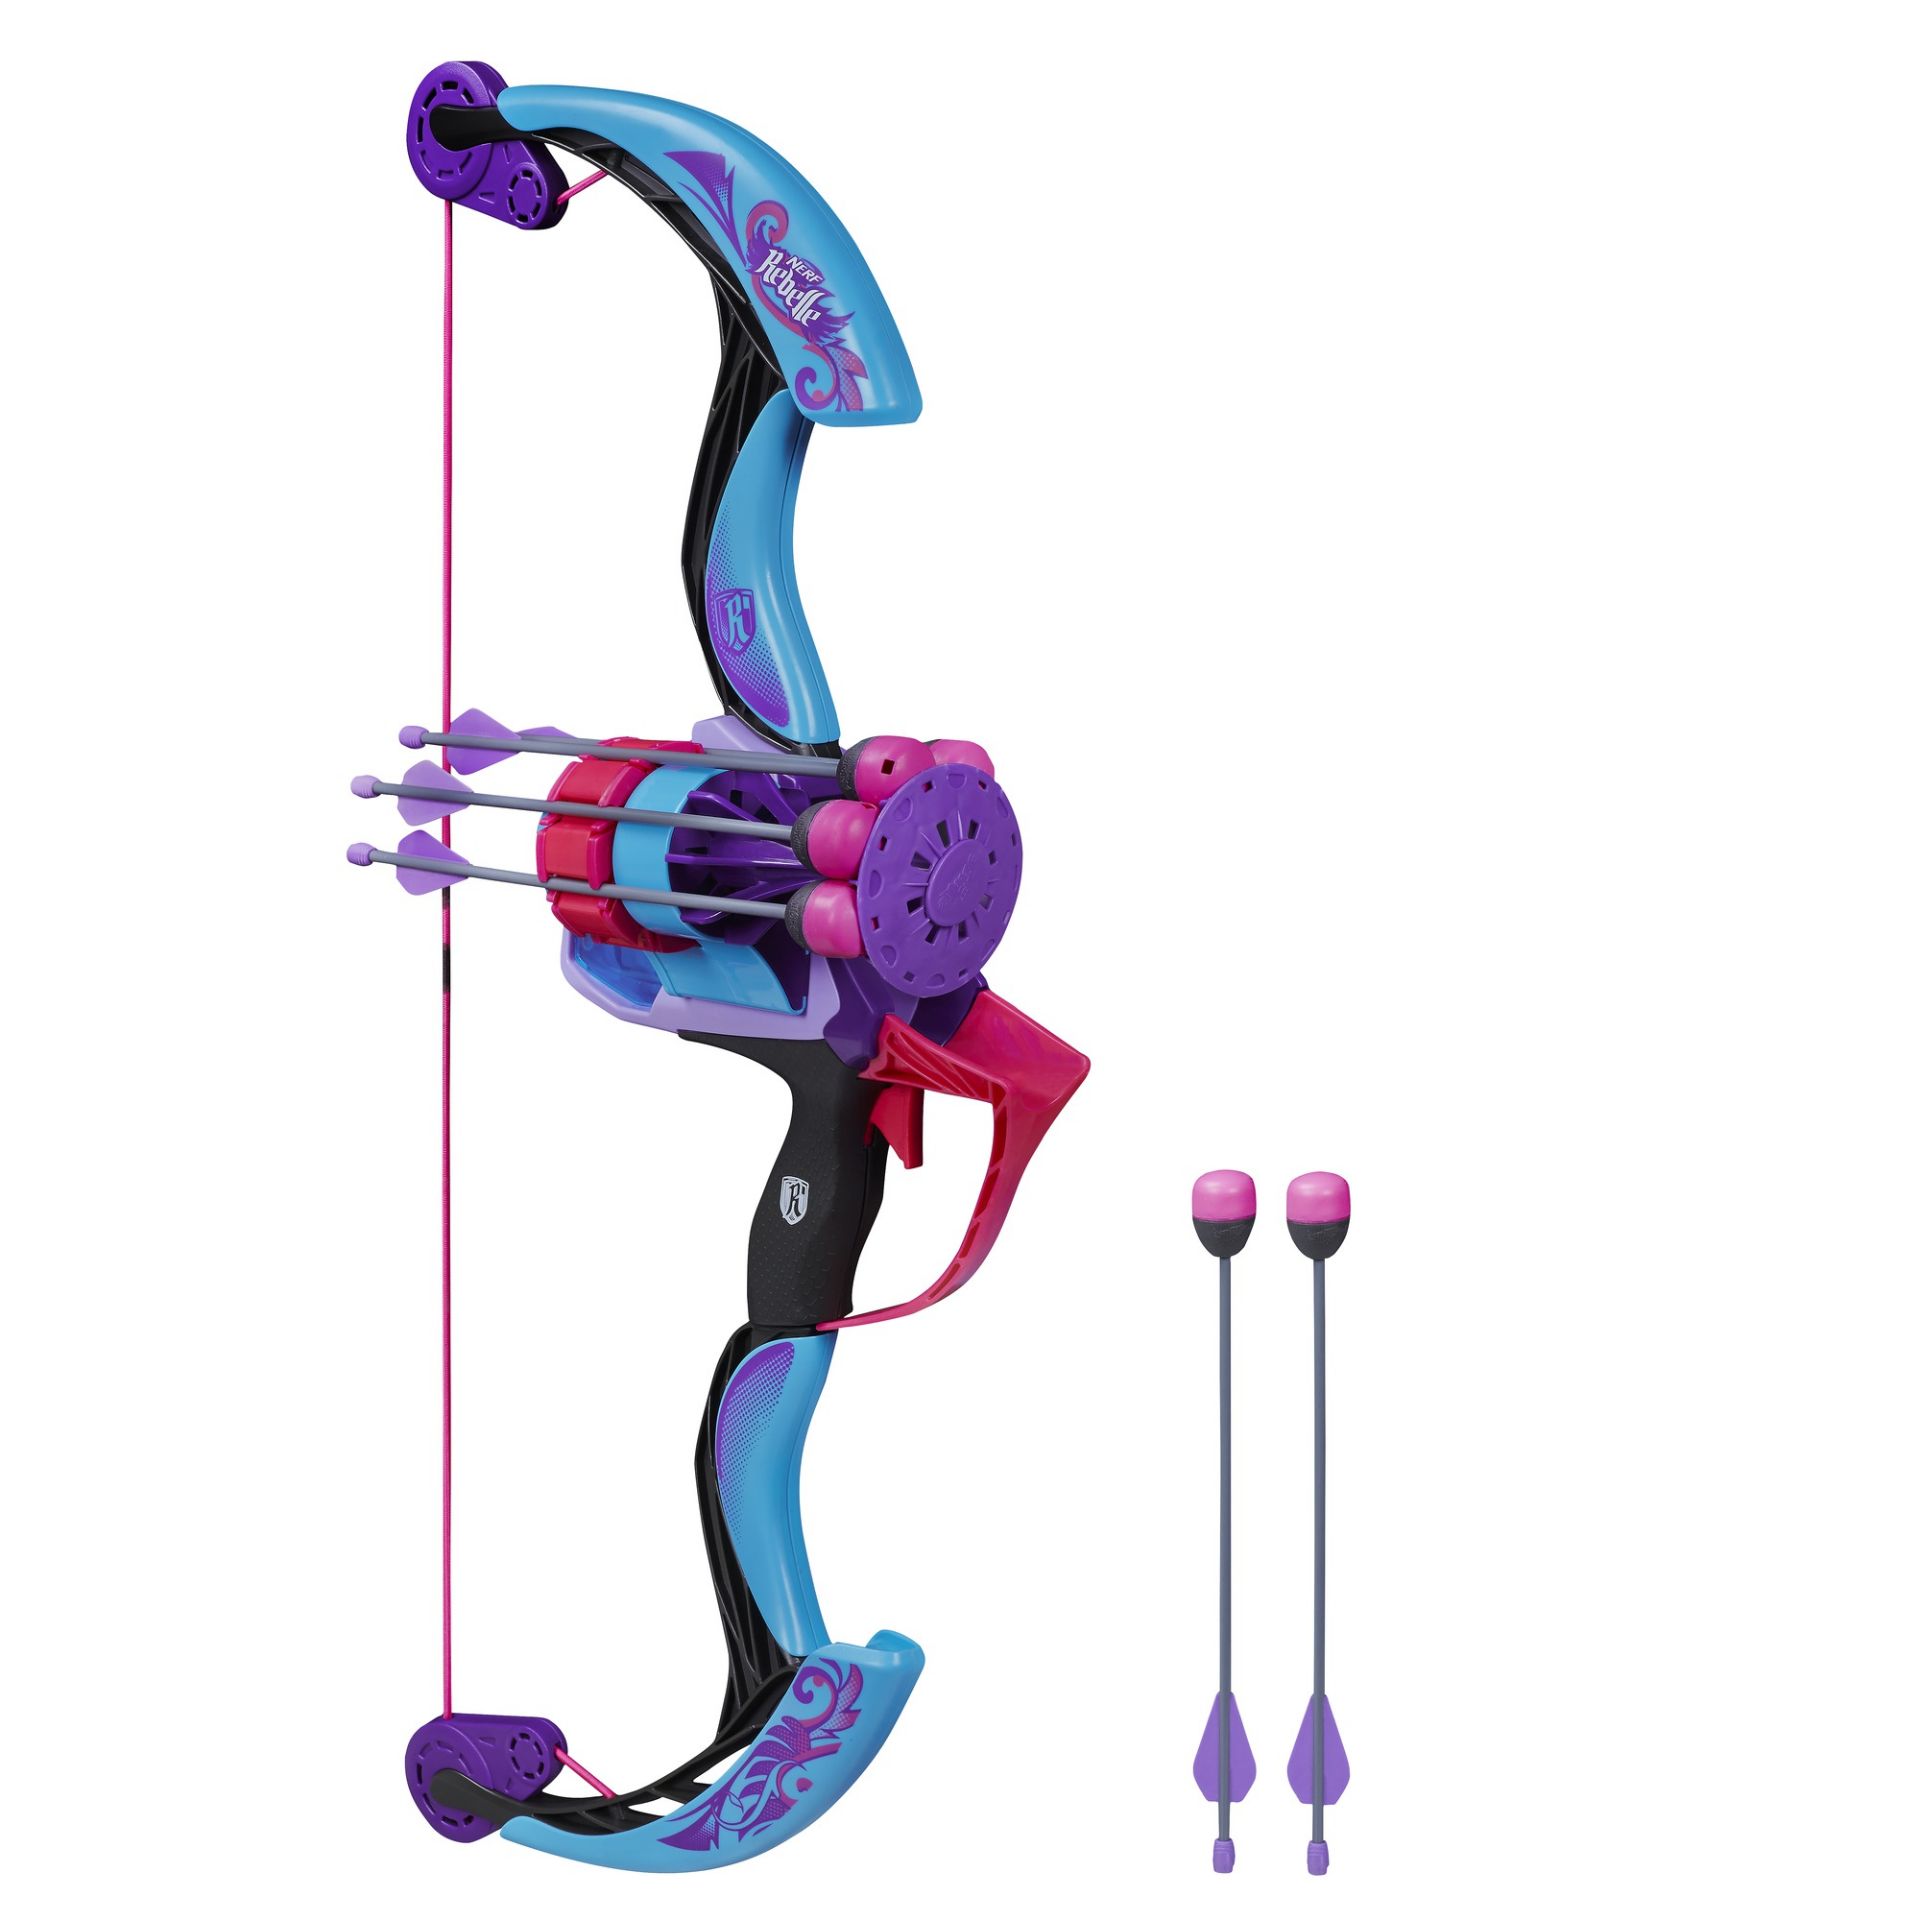 V Brand New Hasbro Nerf Rebelle Arrow Revolution Bow - Fires 6 Whistling Arrows With Rotating Quiver